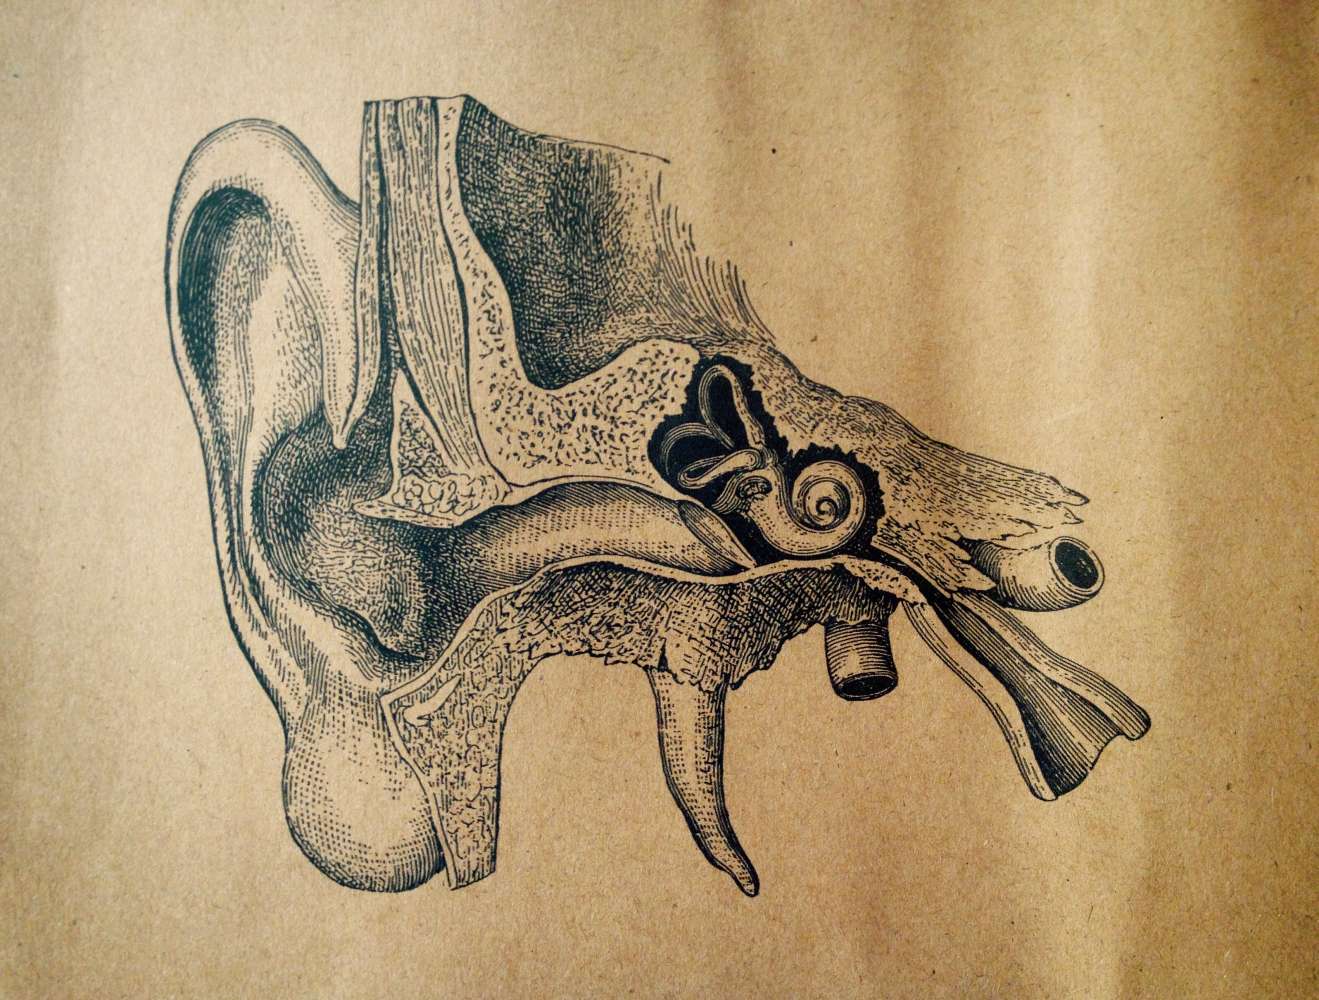 Hand drawn image of ear and ear canal